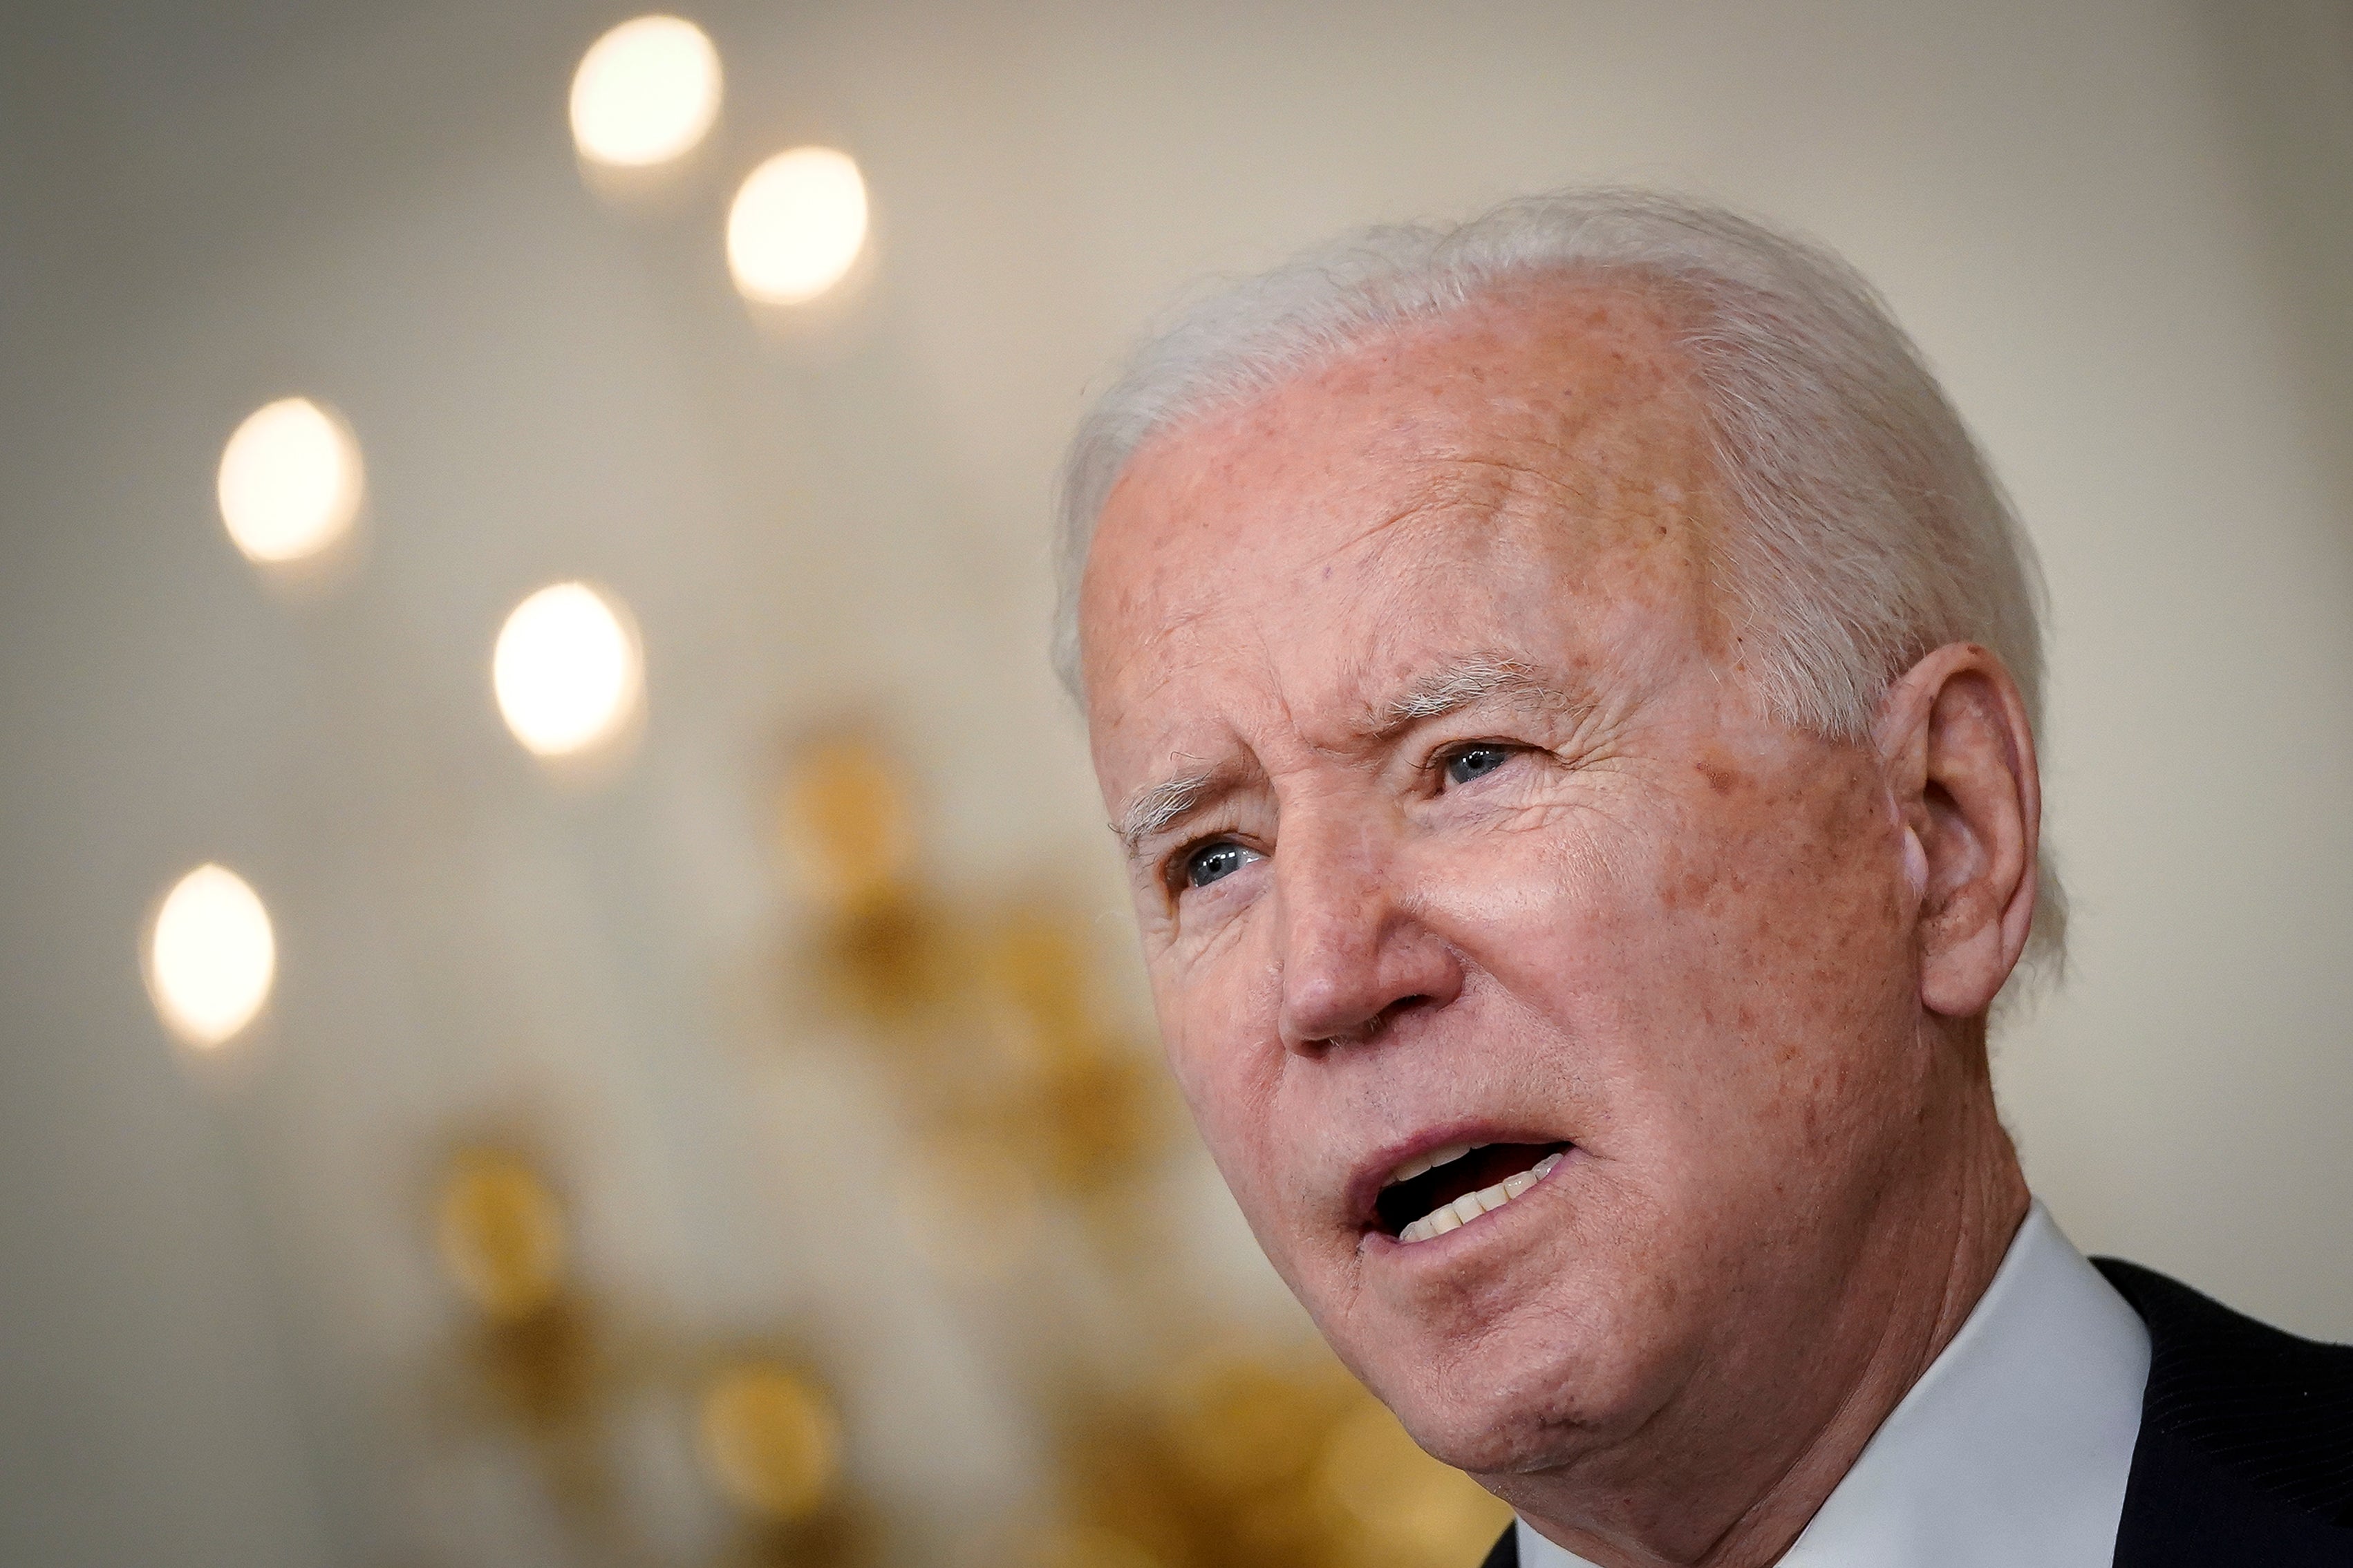 President Joe Biden said inquiry would determine what the women alleged against New York governor is true